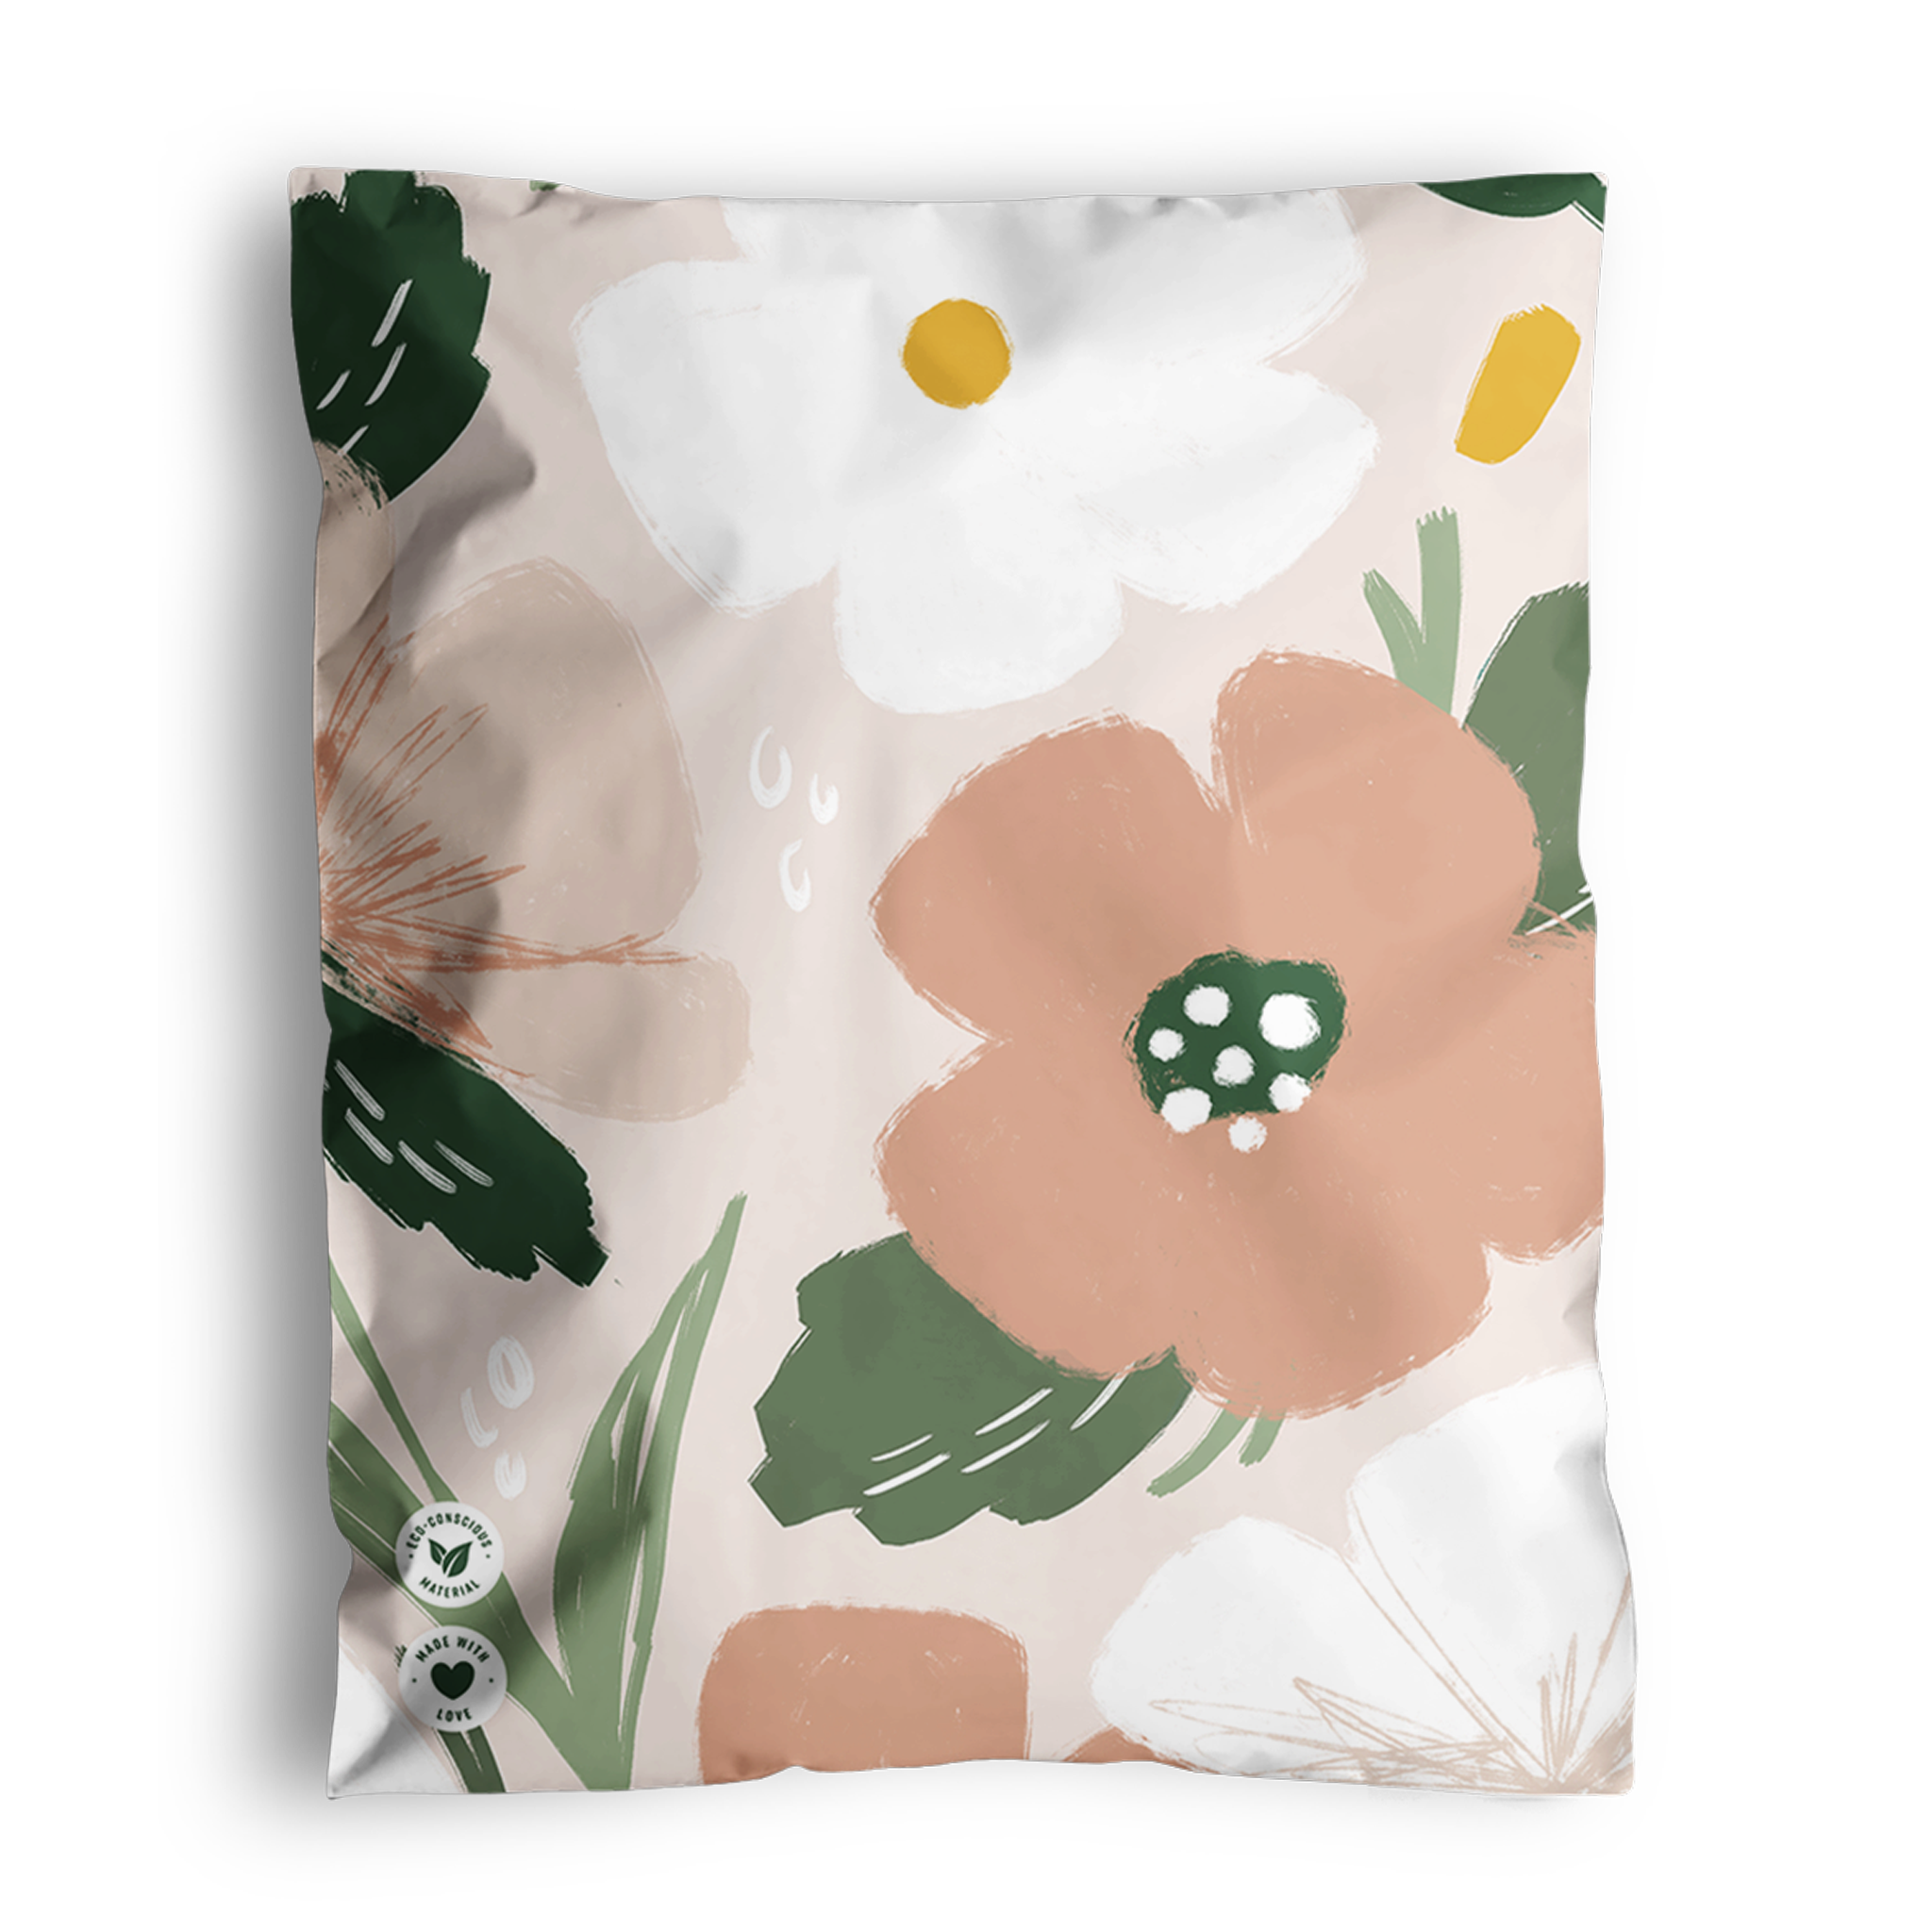 A patterned **Pastel Petals Mailers 10" x 13"** by **impack.co** featuring large flowers in white, peach, and green with leaves. The pastel petals design includes small icons of a leaf and a recycling symbol at the bottom left corner, emphasizing its eco-friendly nature.